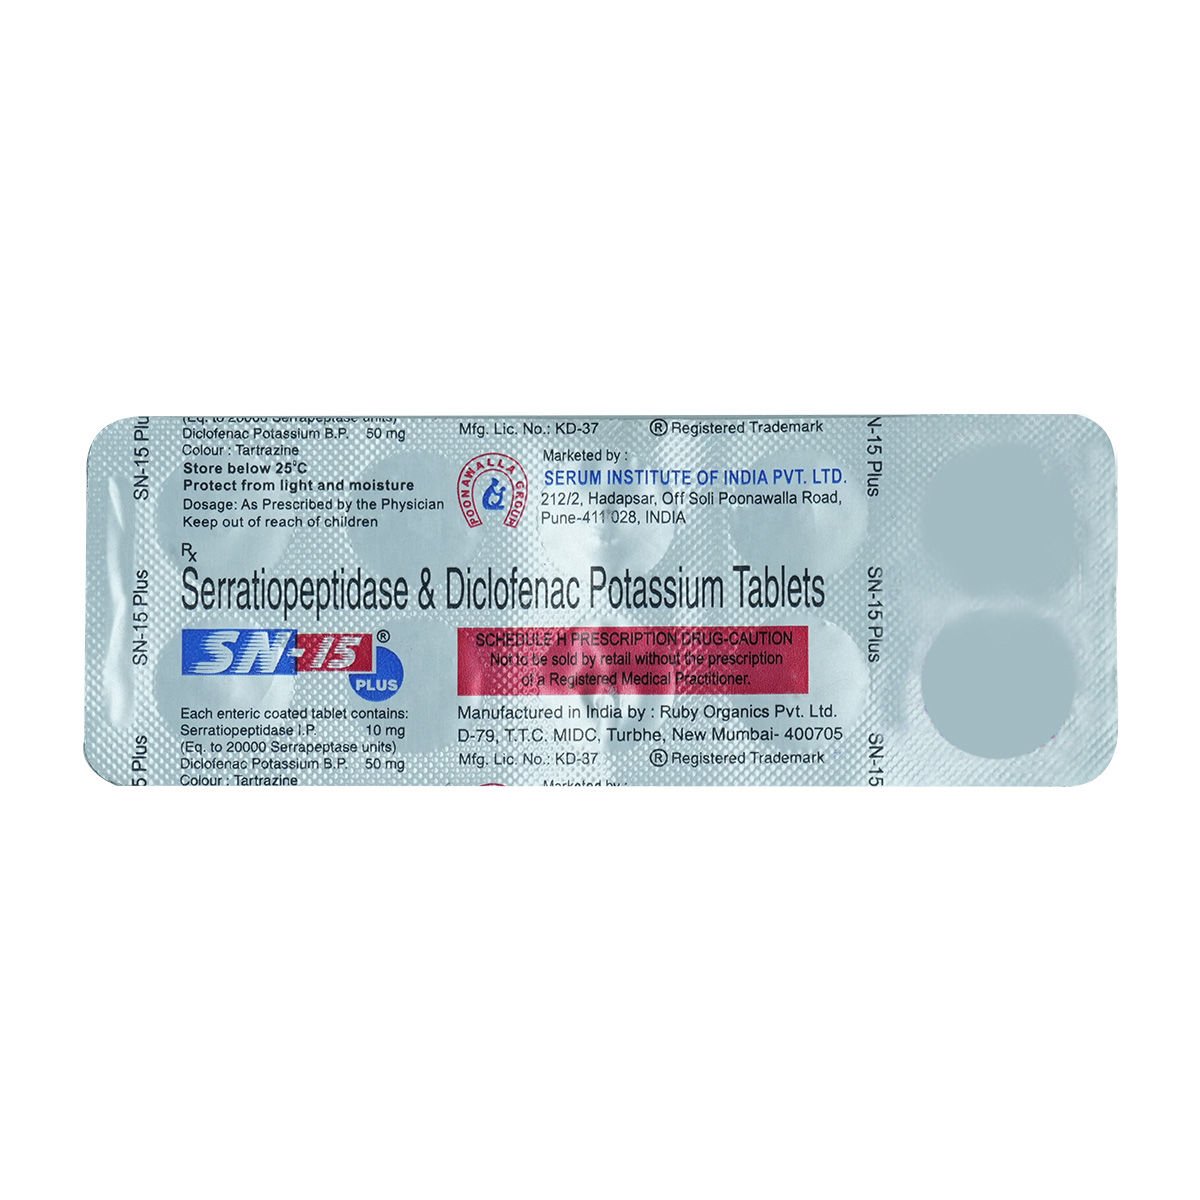 SN 15MG PLUS TABLET, Pack of 10 TABLETS